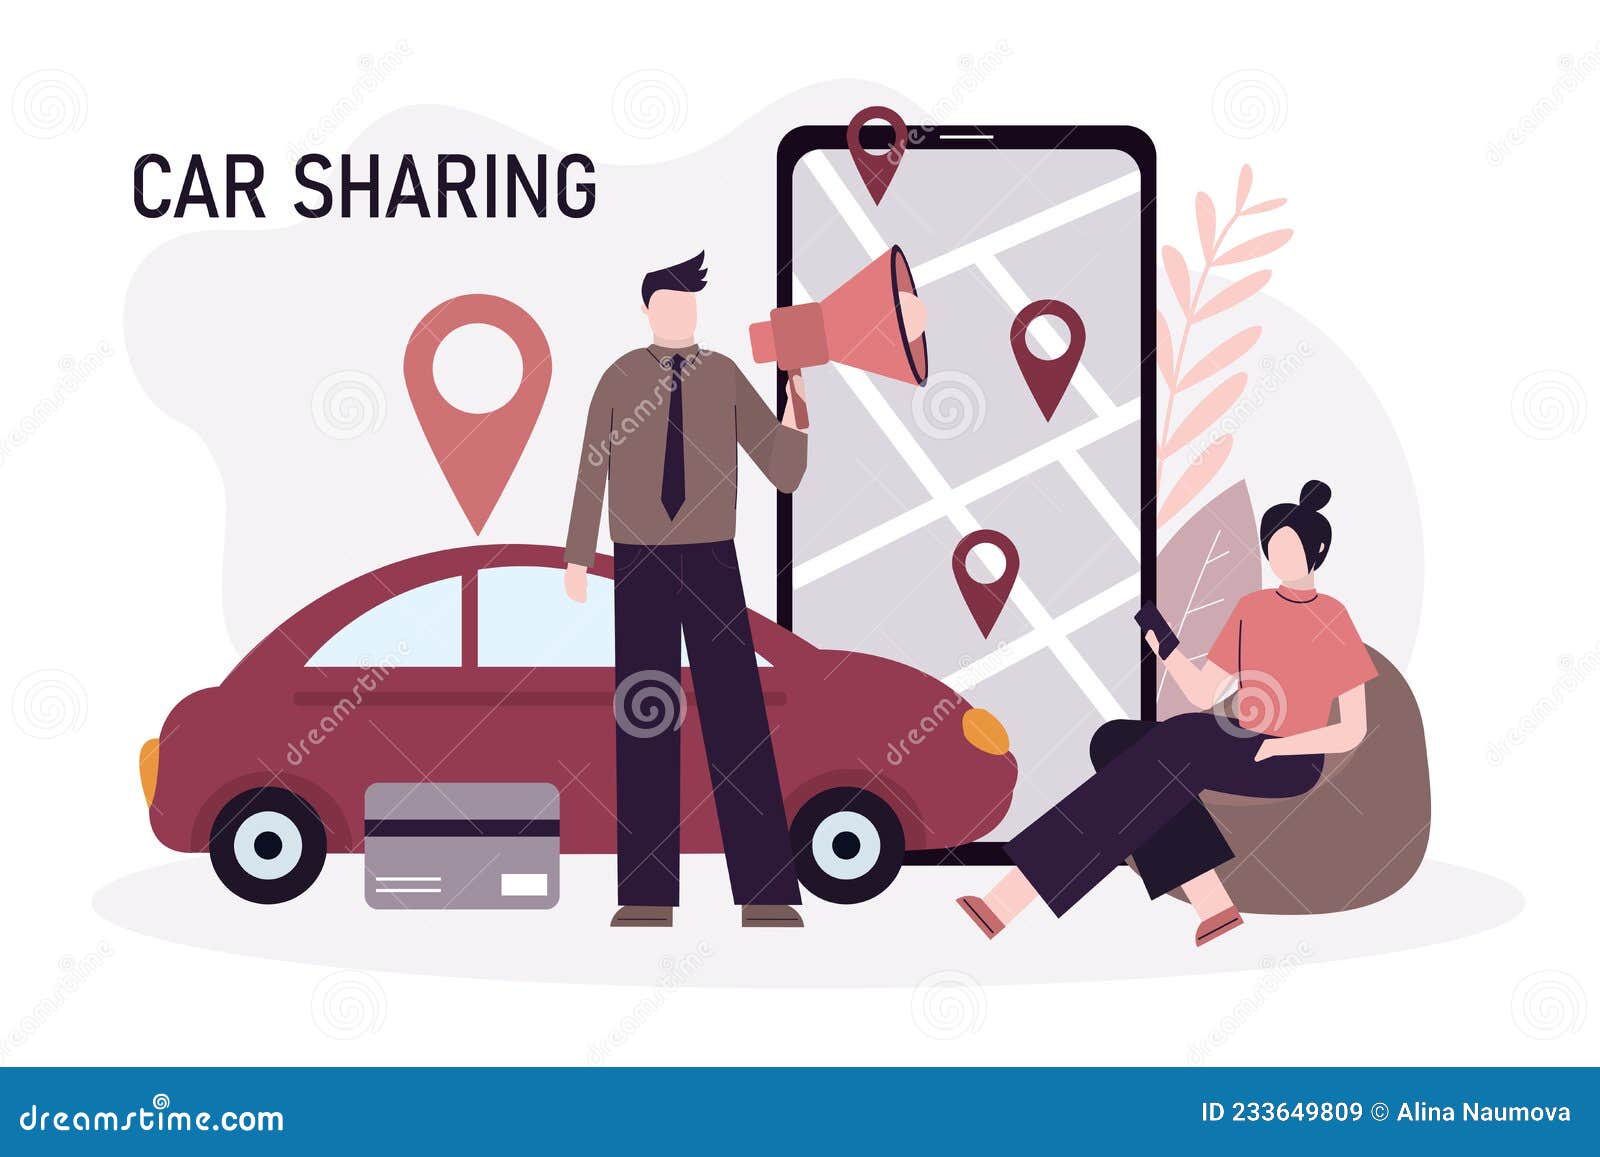 Cartoon Man with Megaphone Offers Car Sharing in App. Car Rental  Application on Mobile Phone Screen Stock Vector - Illustration of taxi,  rental: 233649809